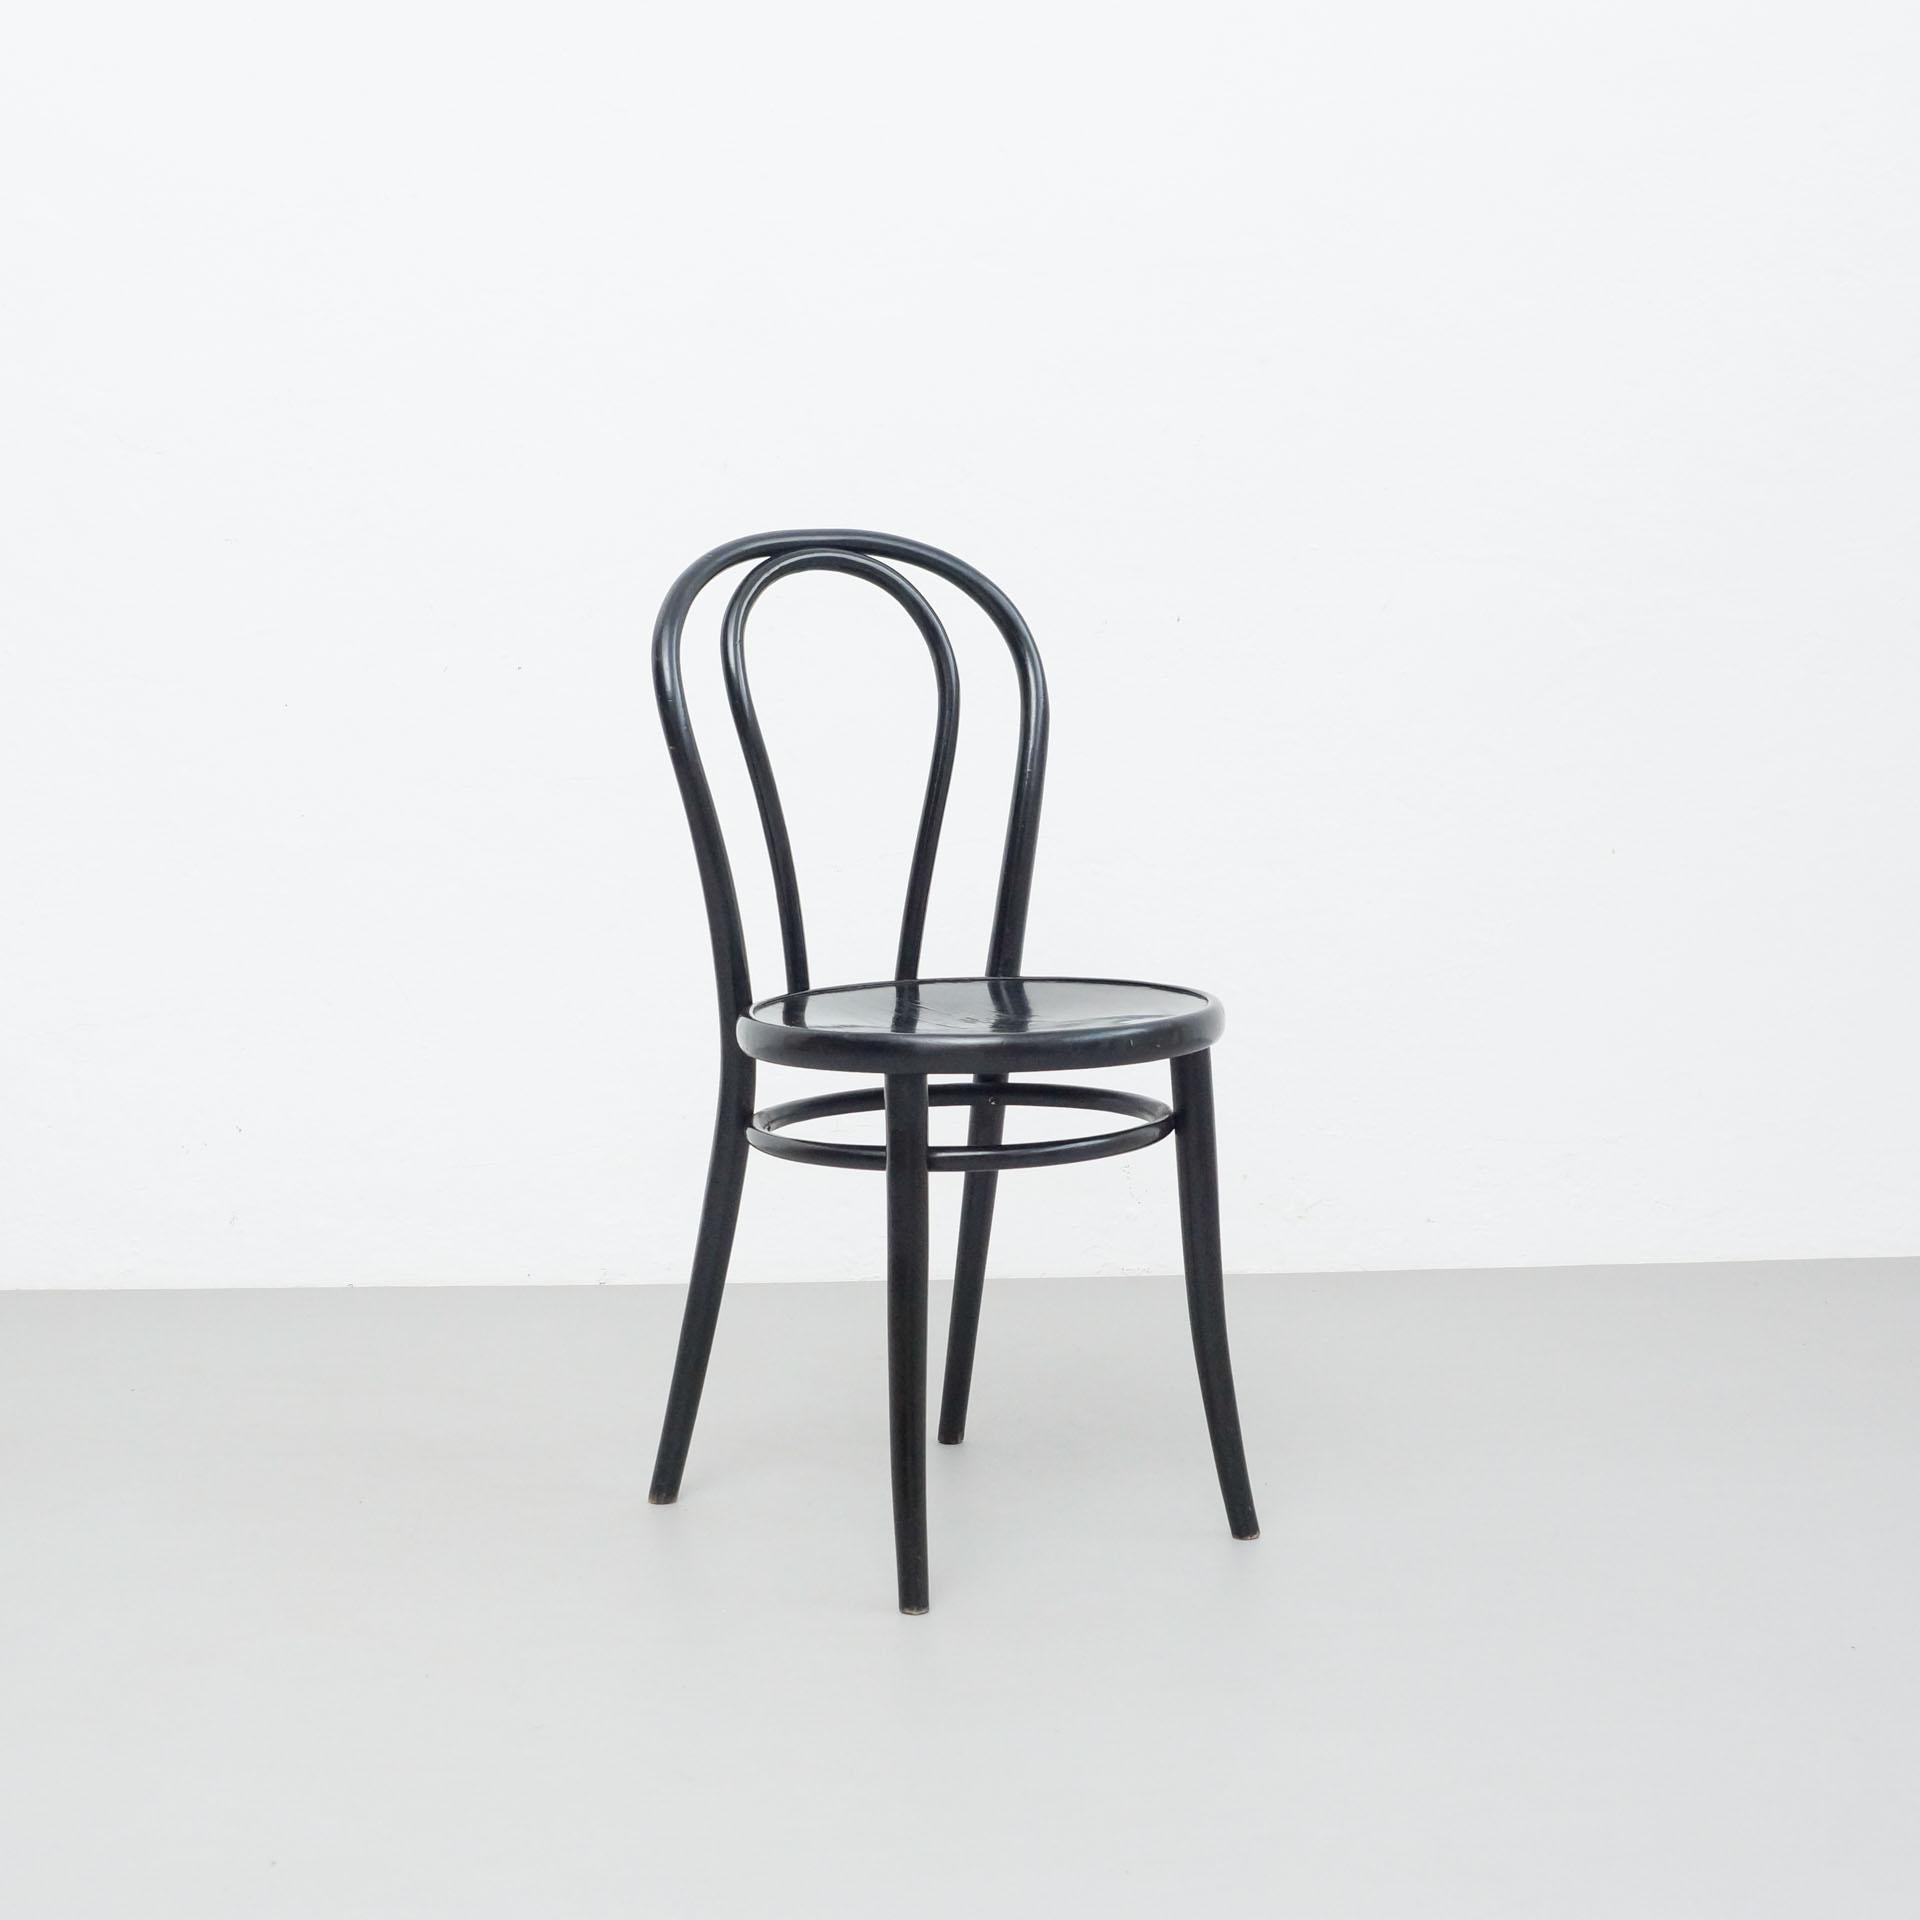 Mid-20th Century Black Bentwood Chair in the Style of Thonet, circa 1950